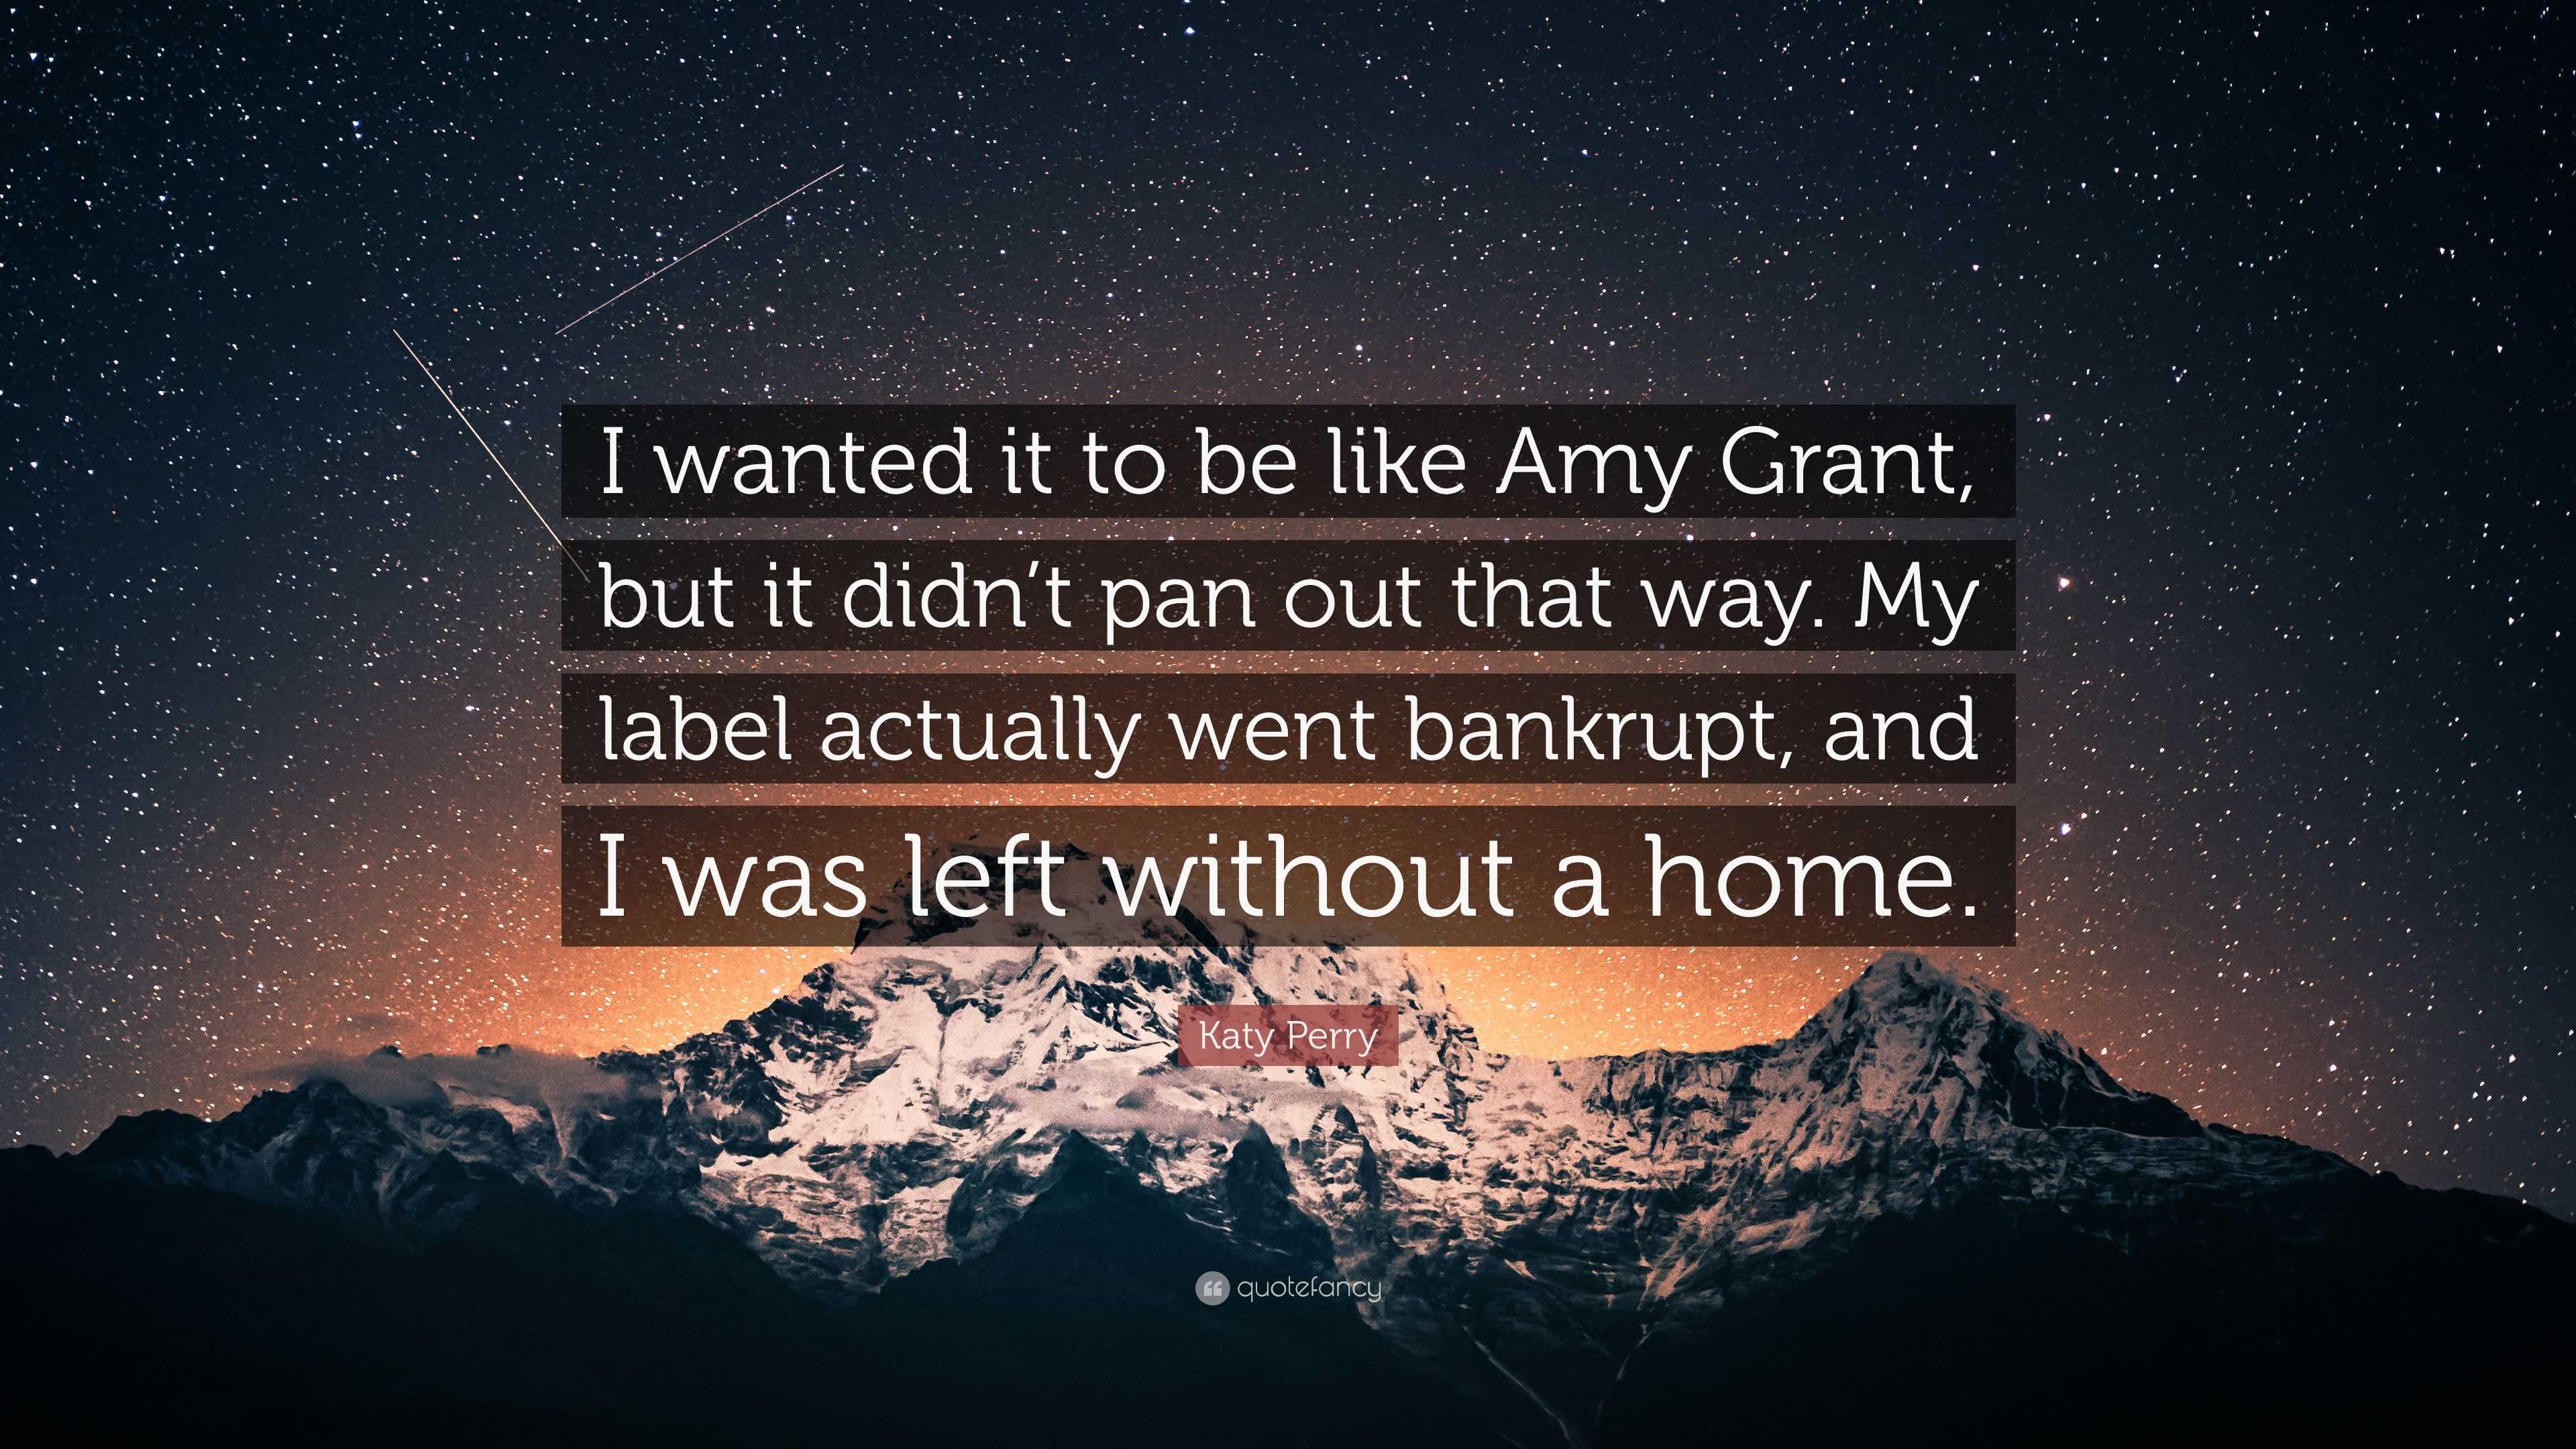 Katy Perry Quote “i Wanted It To Be Like Amy Grant But It Didnt Pan